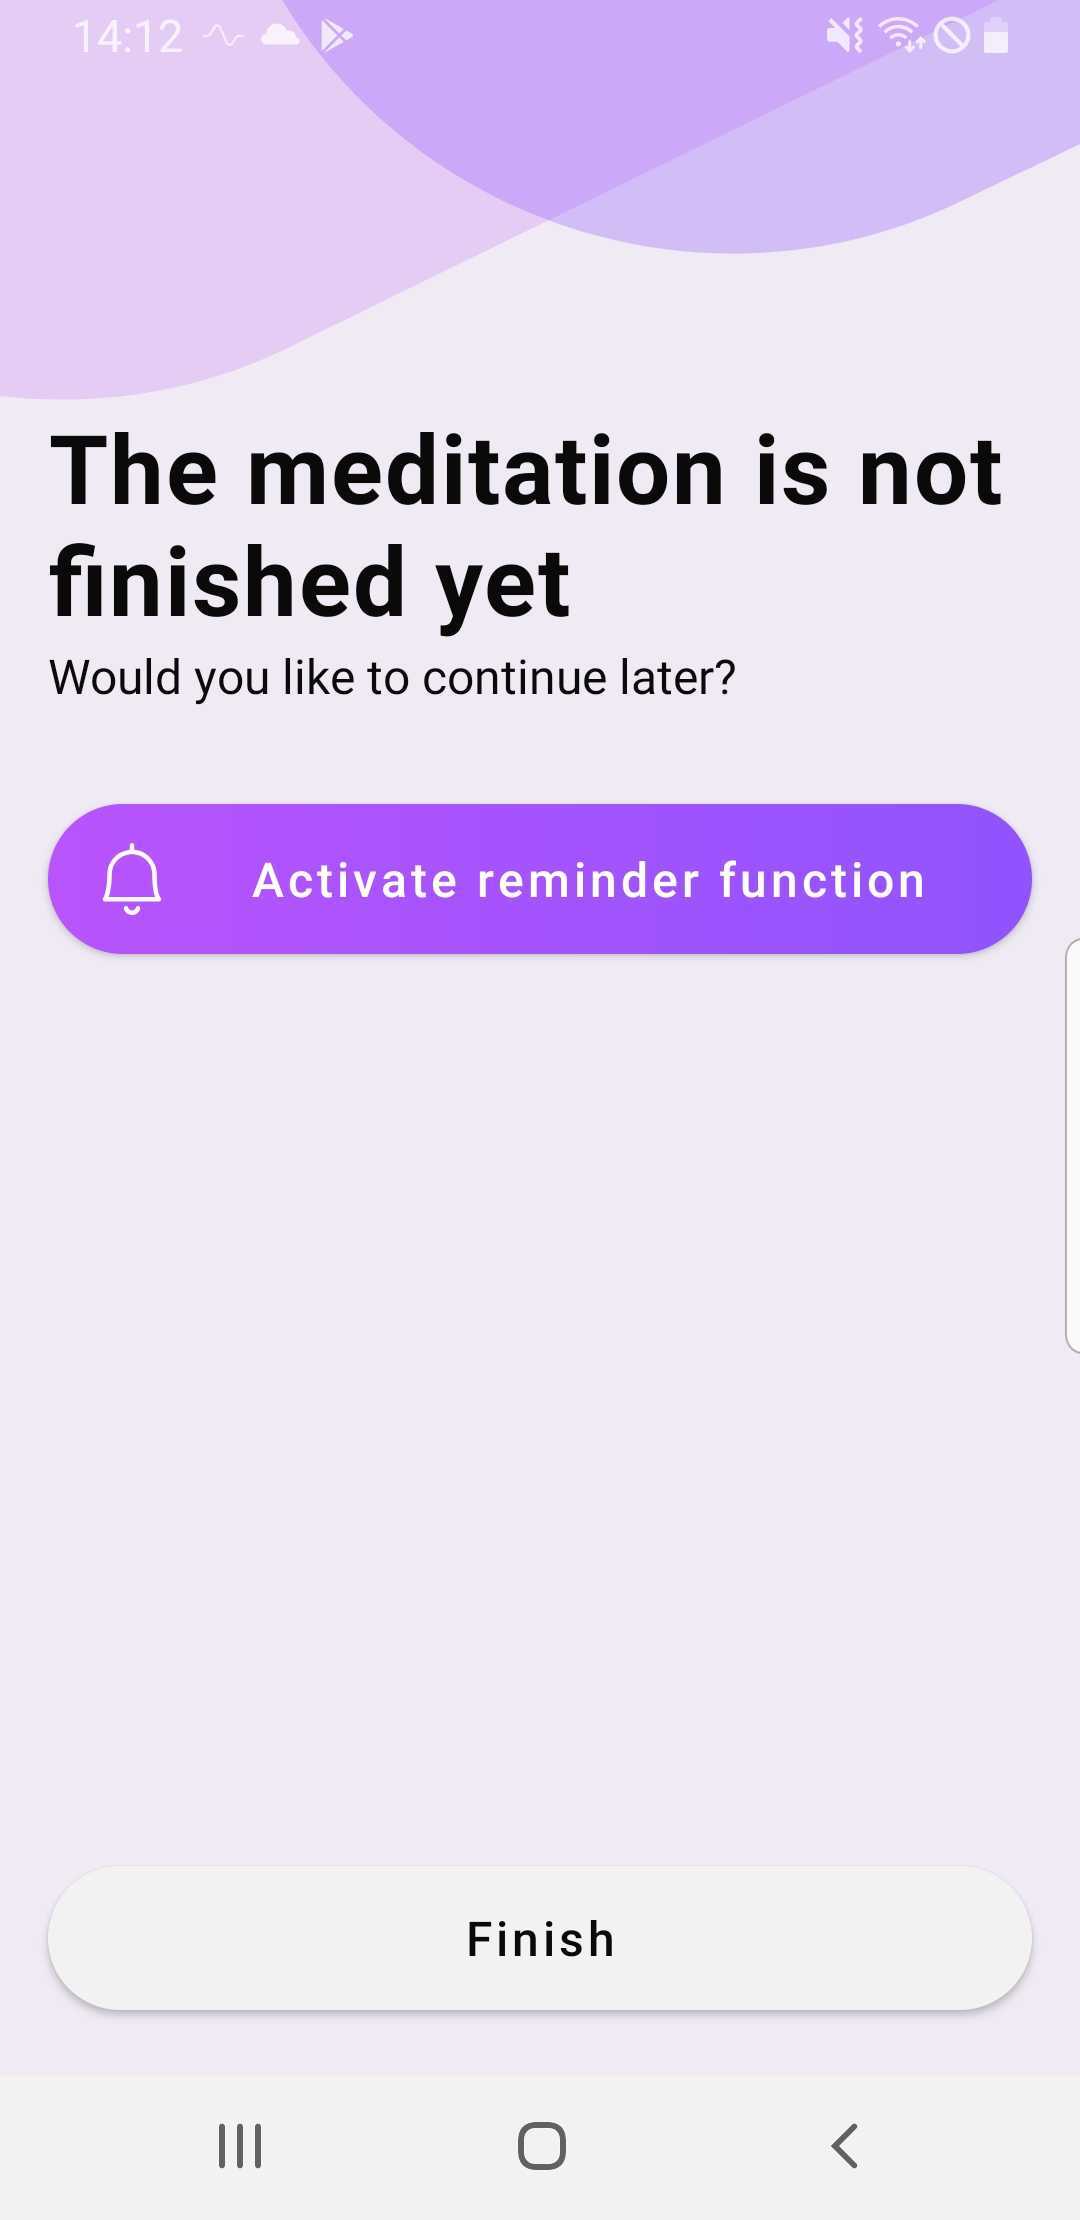 activate the reminder function for your meditation